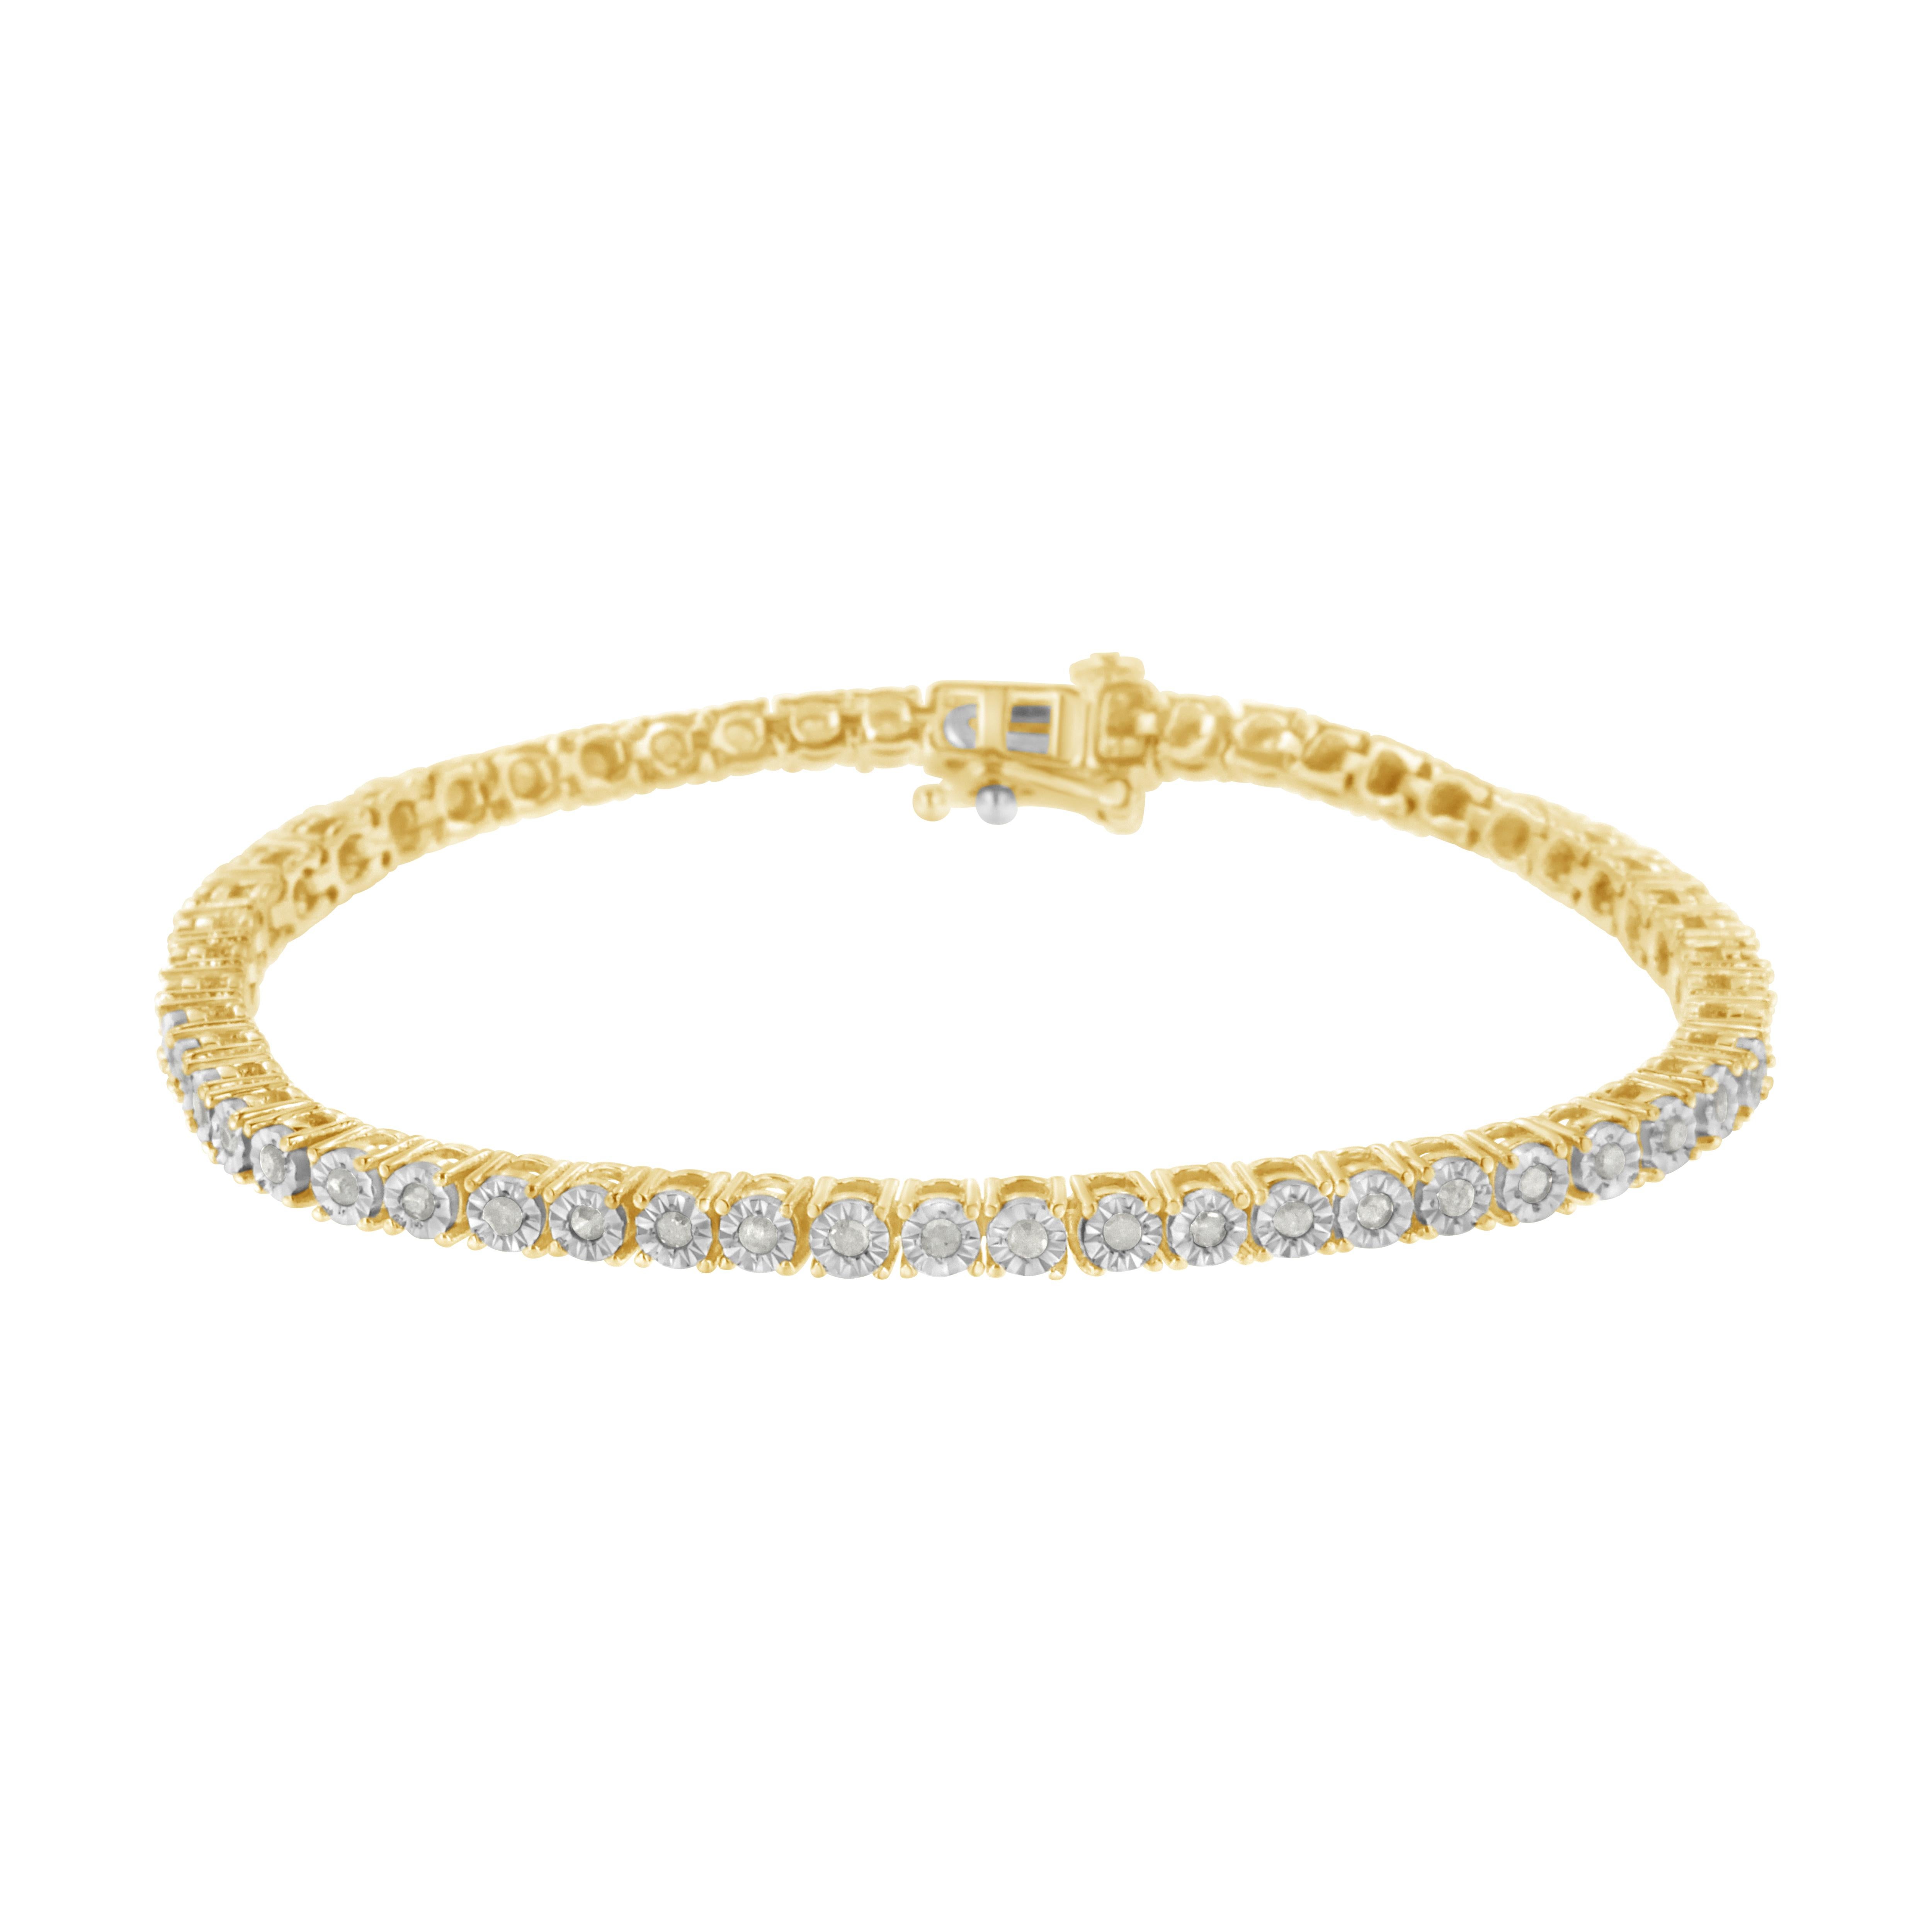 This feminine and luxe tennis bracelet is made up of the most lovely, multifaceted rose cut diamonds, reminiscent of vintage-era Art Deco jewelry style. Set in real, solid .925 sterling silver links for a timeless style, in your choice of precious